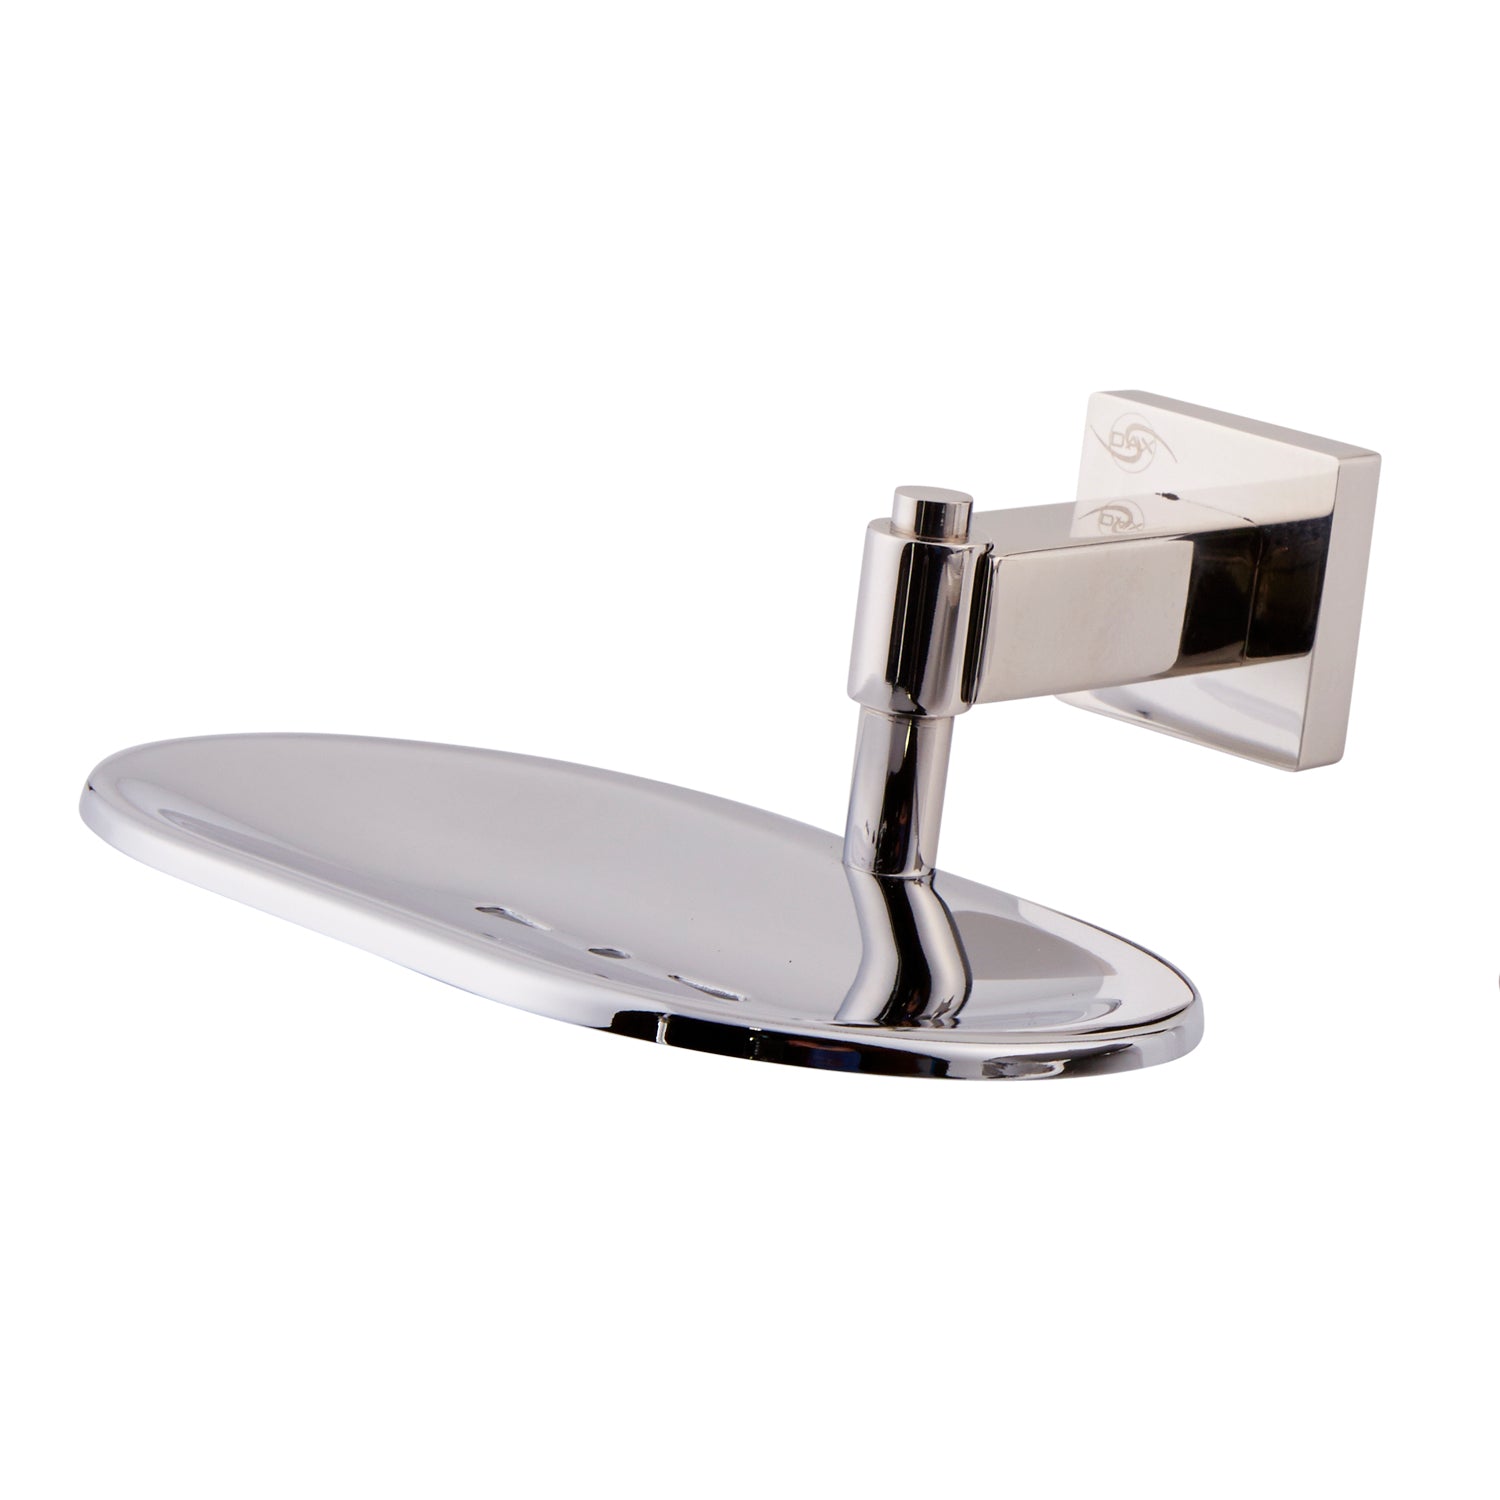 DAX Stainless Steel Soap Dish, Wall Mount Tray, Satin Finish, 6-1/8 x 2-7/16 x 5-15/16 Inches (DAX-G0105A-S)